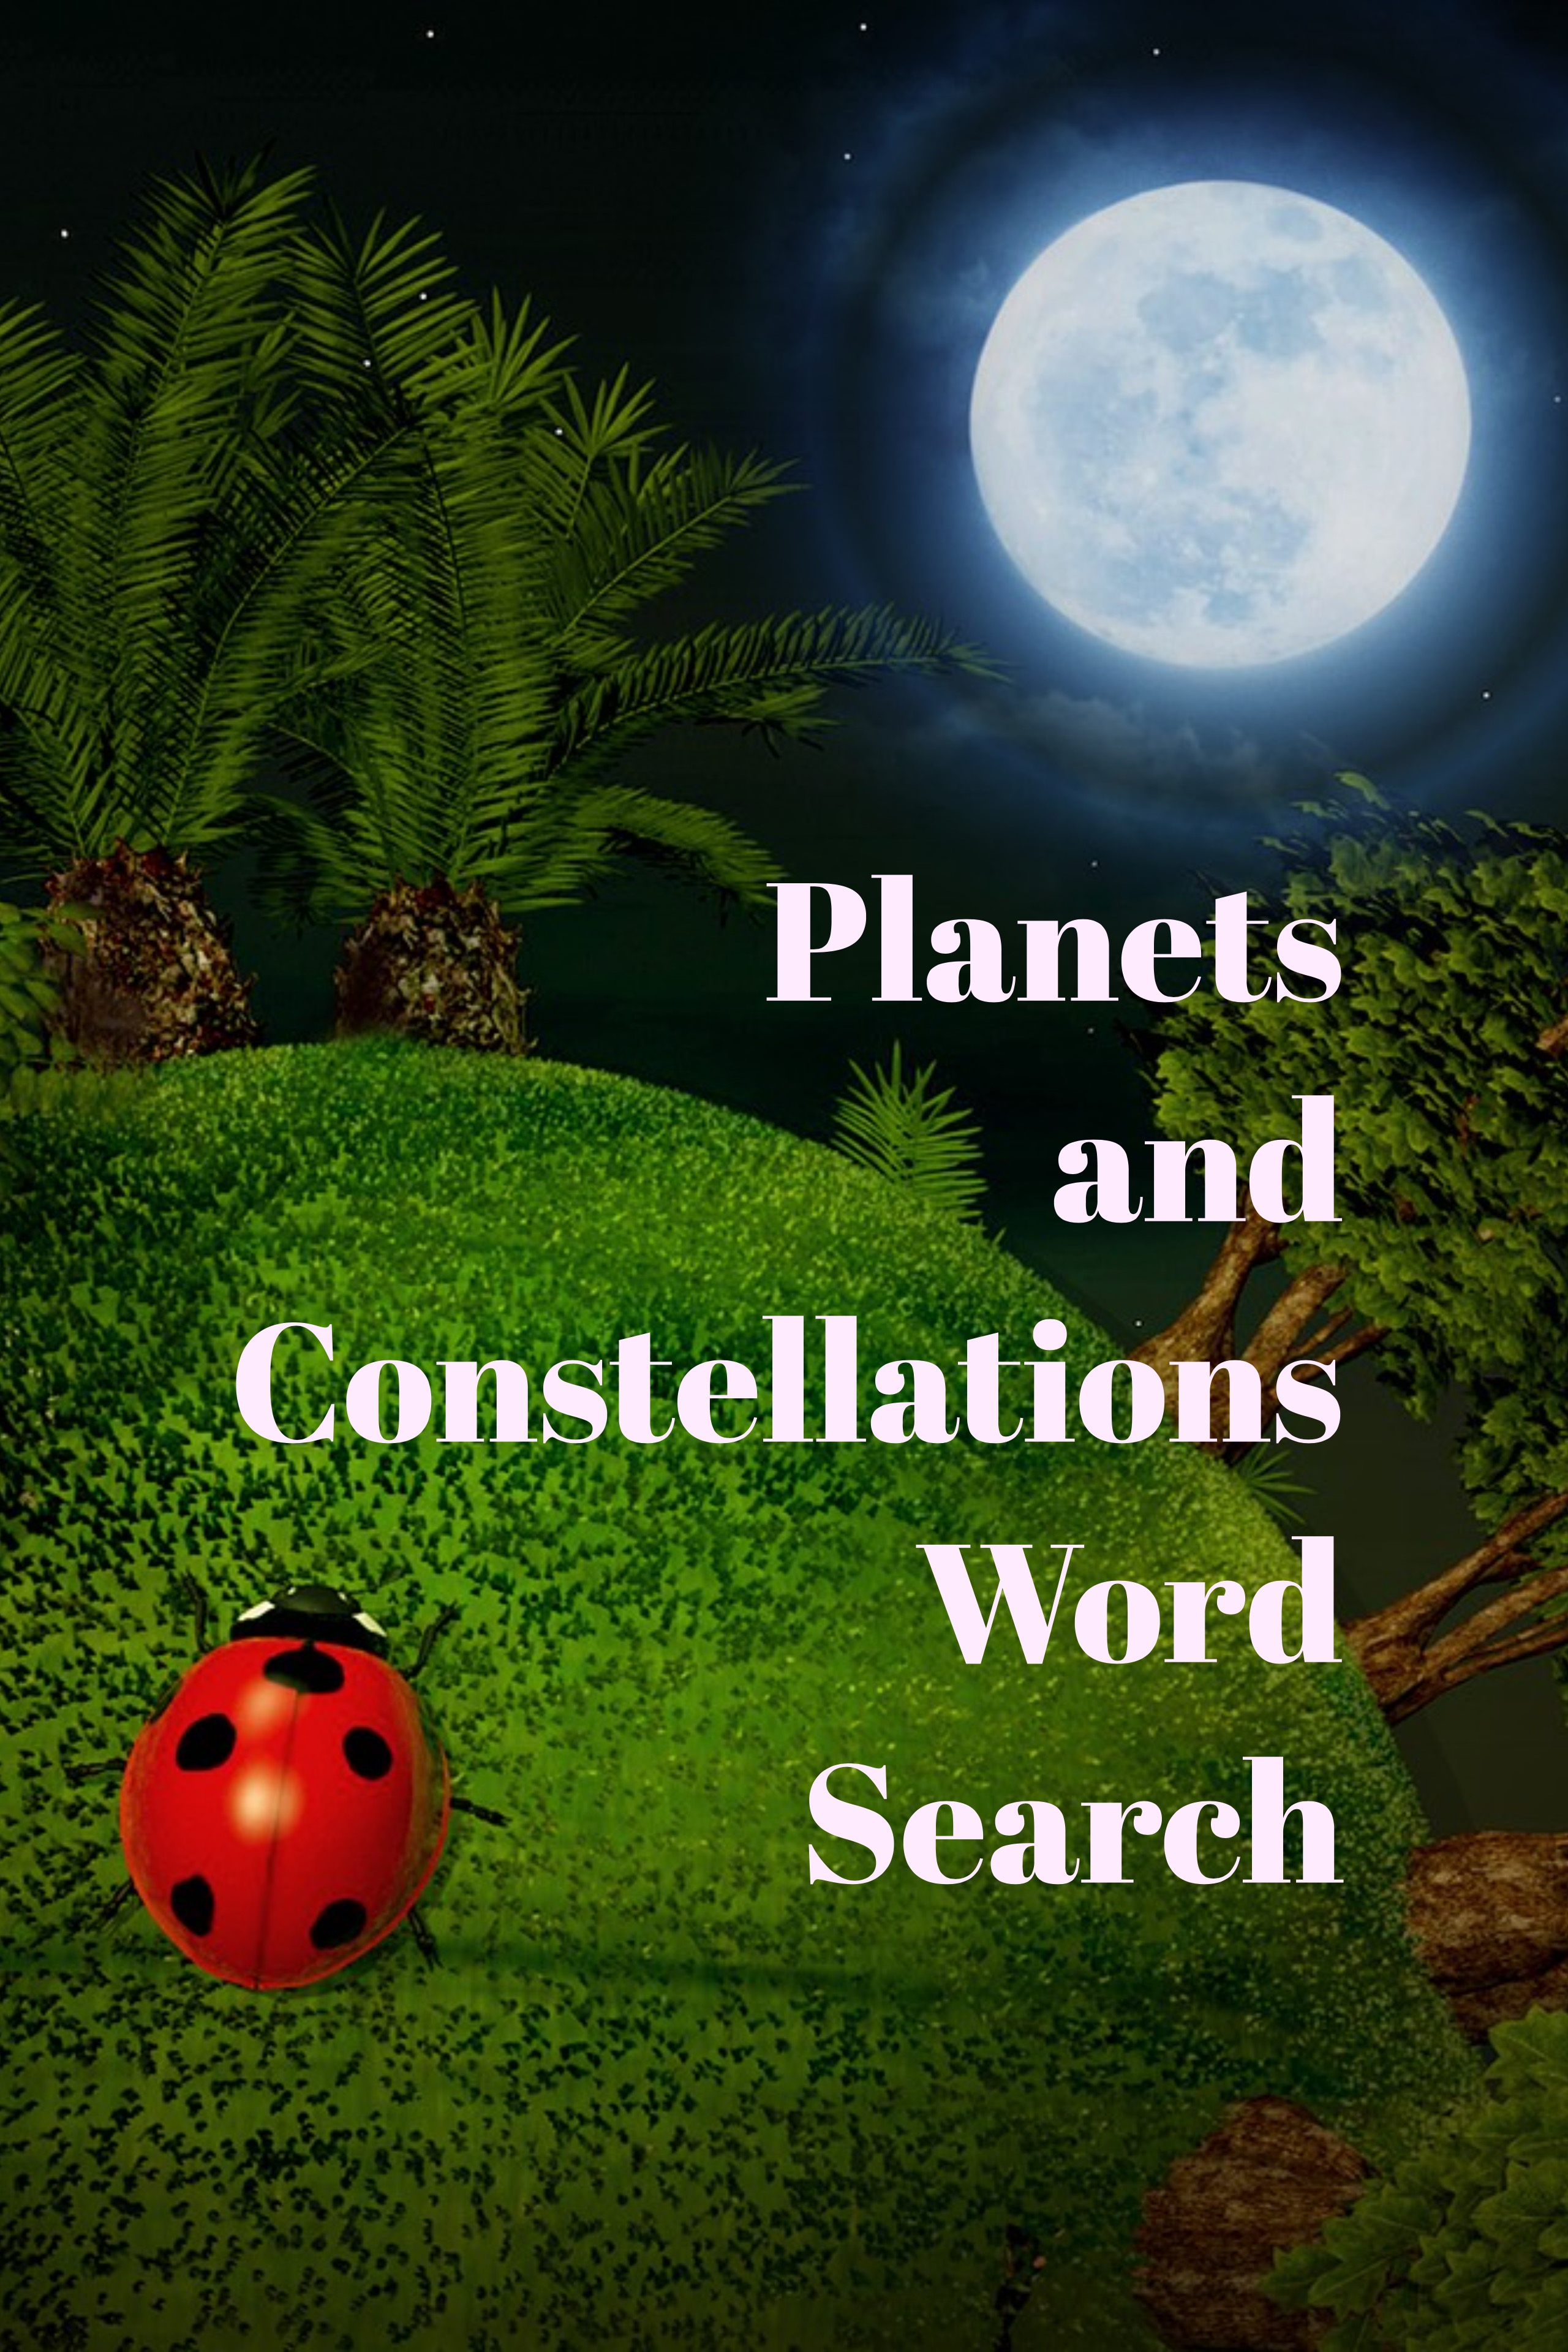 Planets and Constellations Word Search